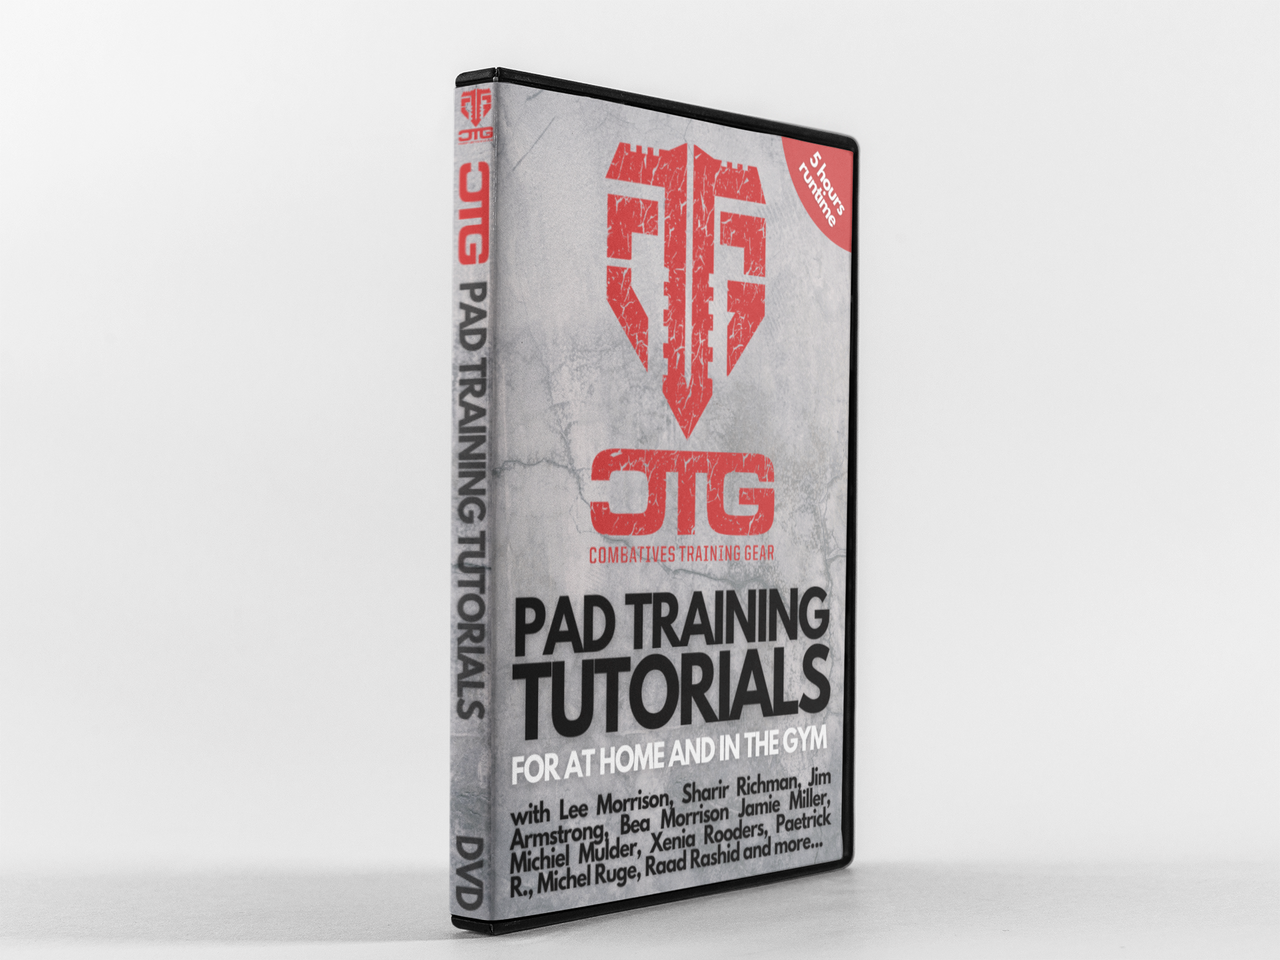 Combatives Training Pad Training Tutorials DVD for at home and in the Gym